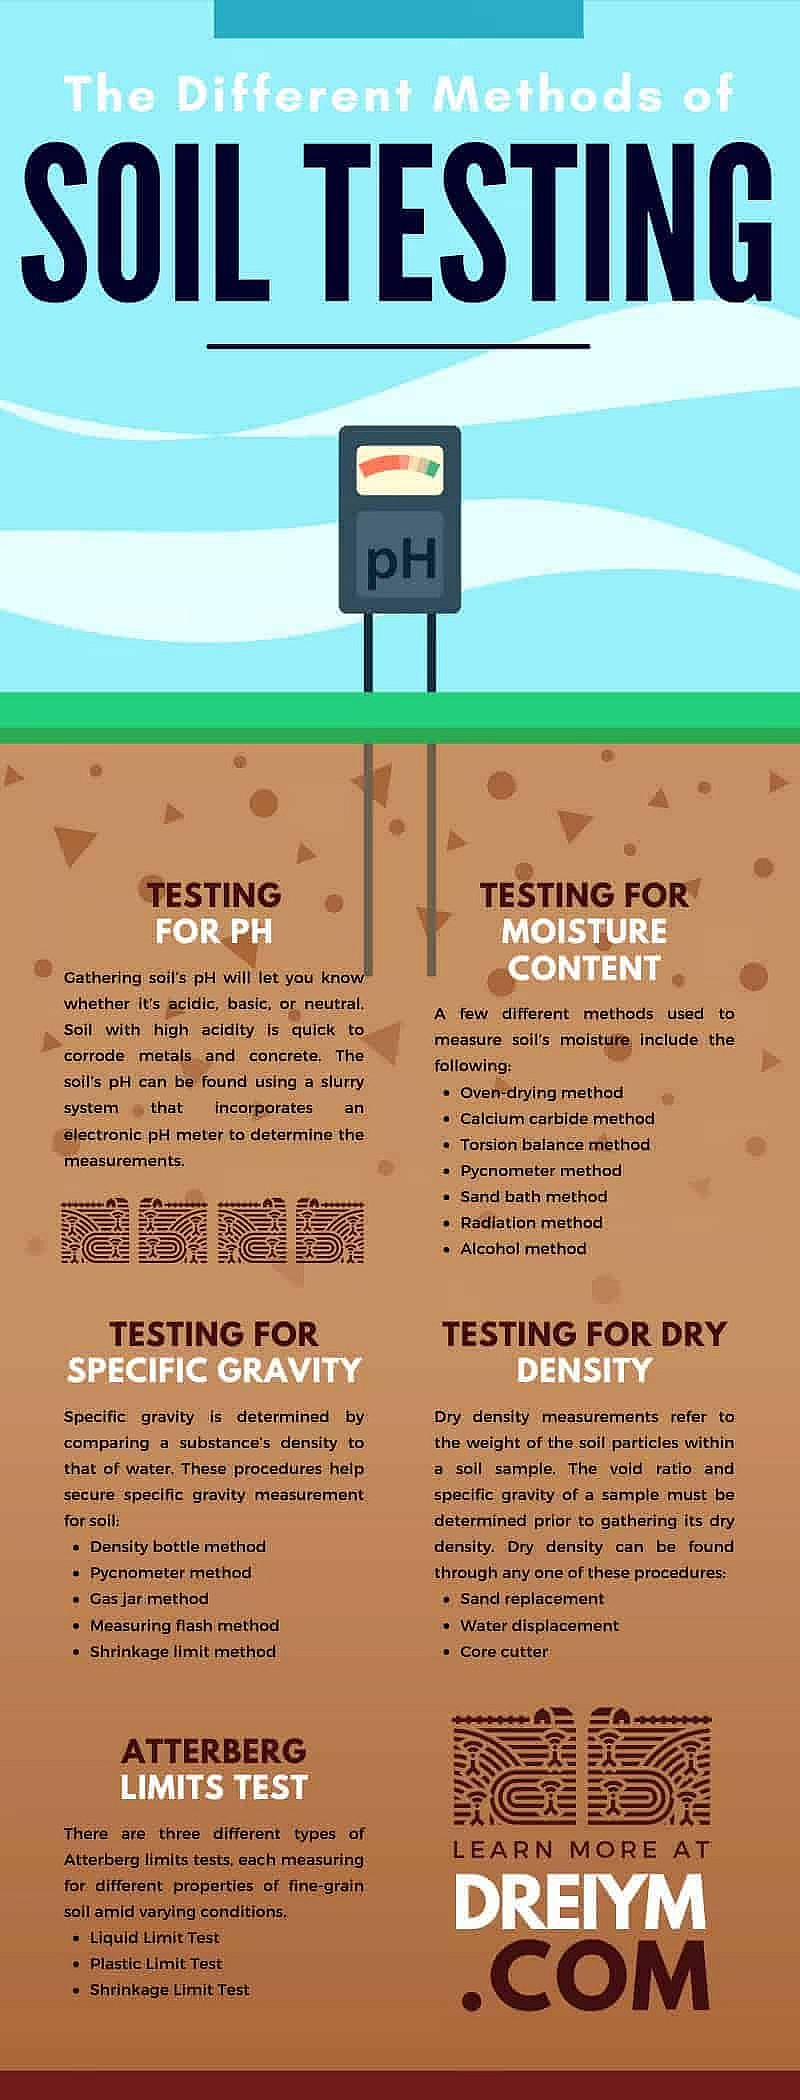 The Different Methods of Soil Testing